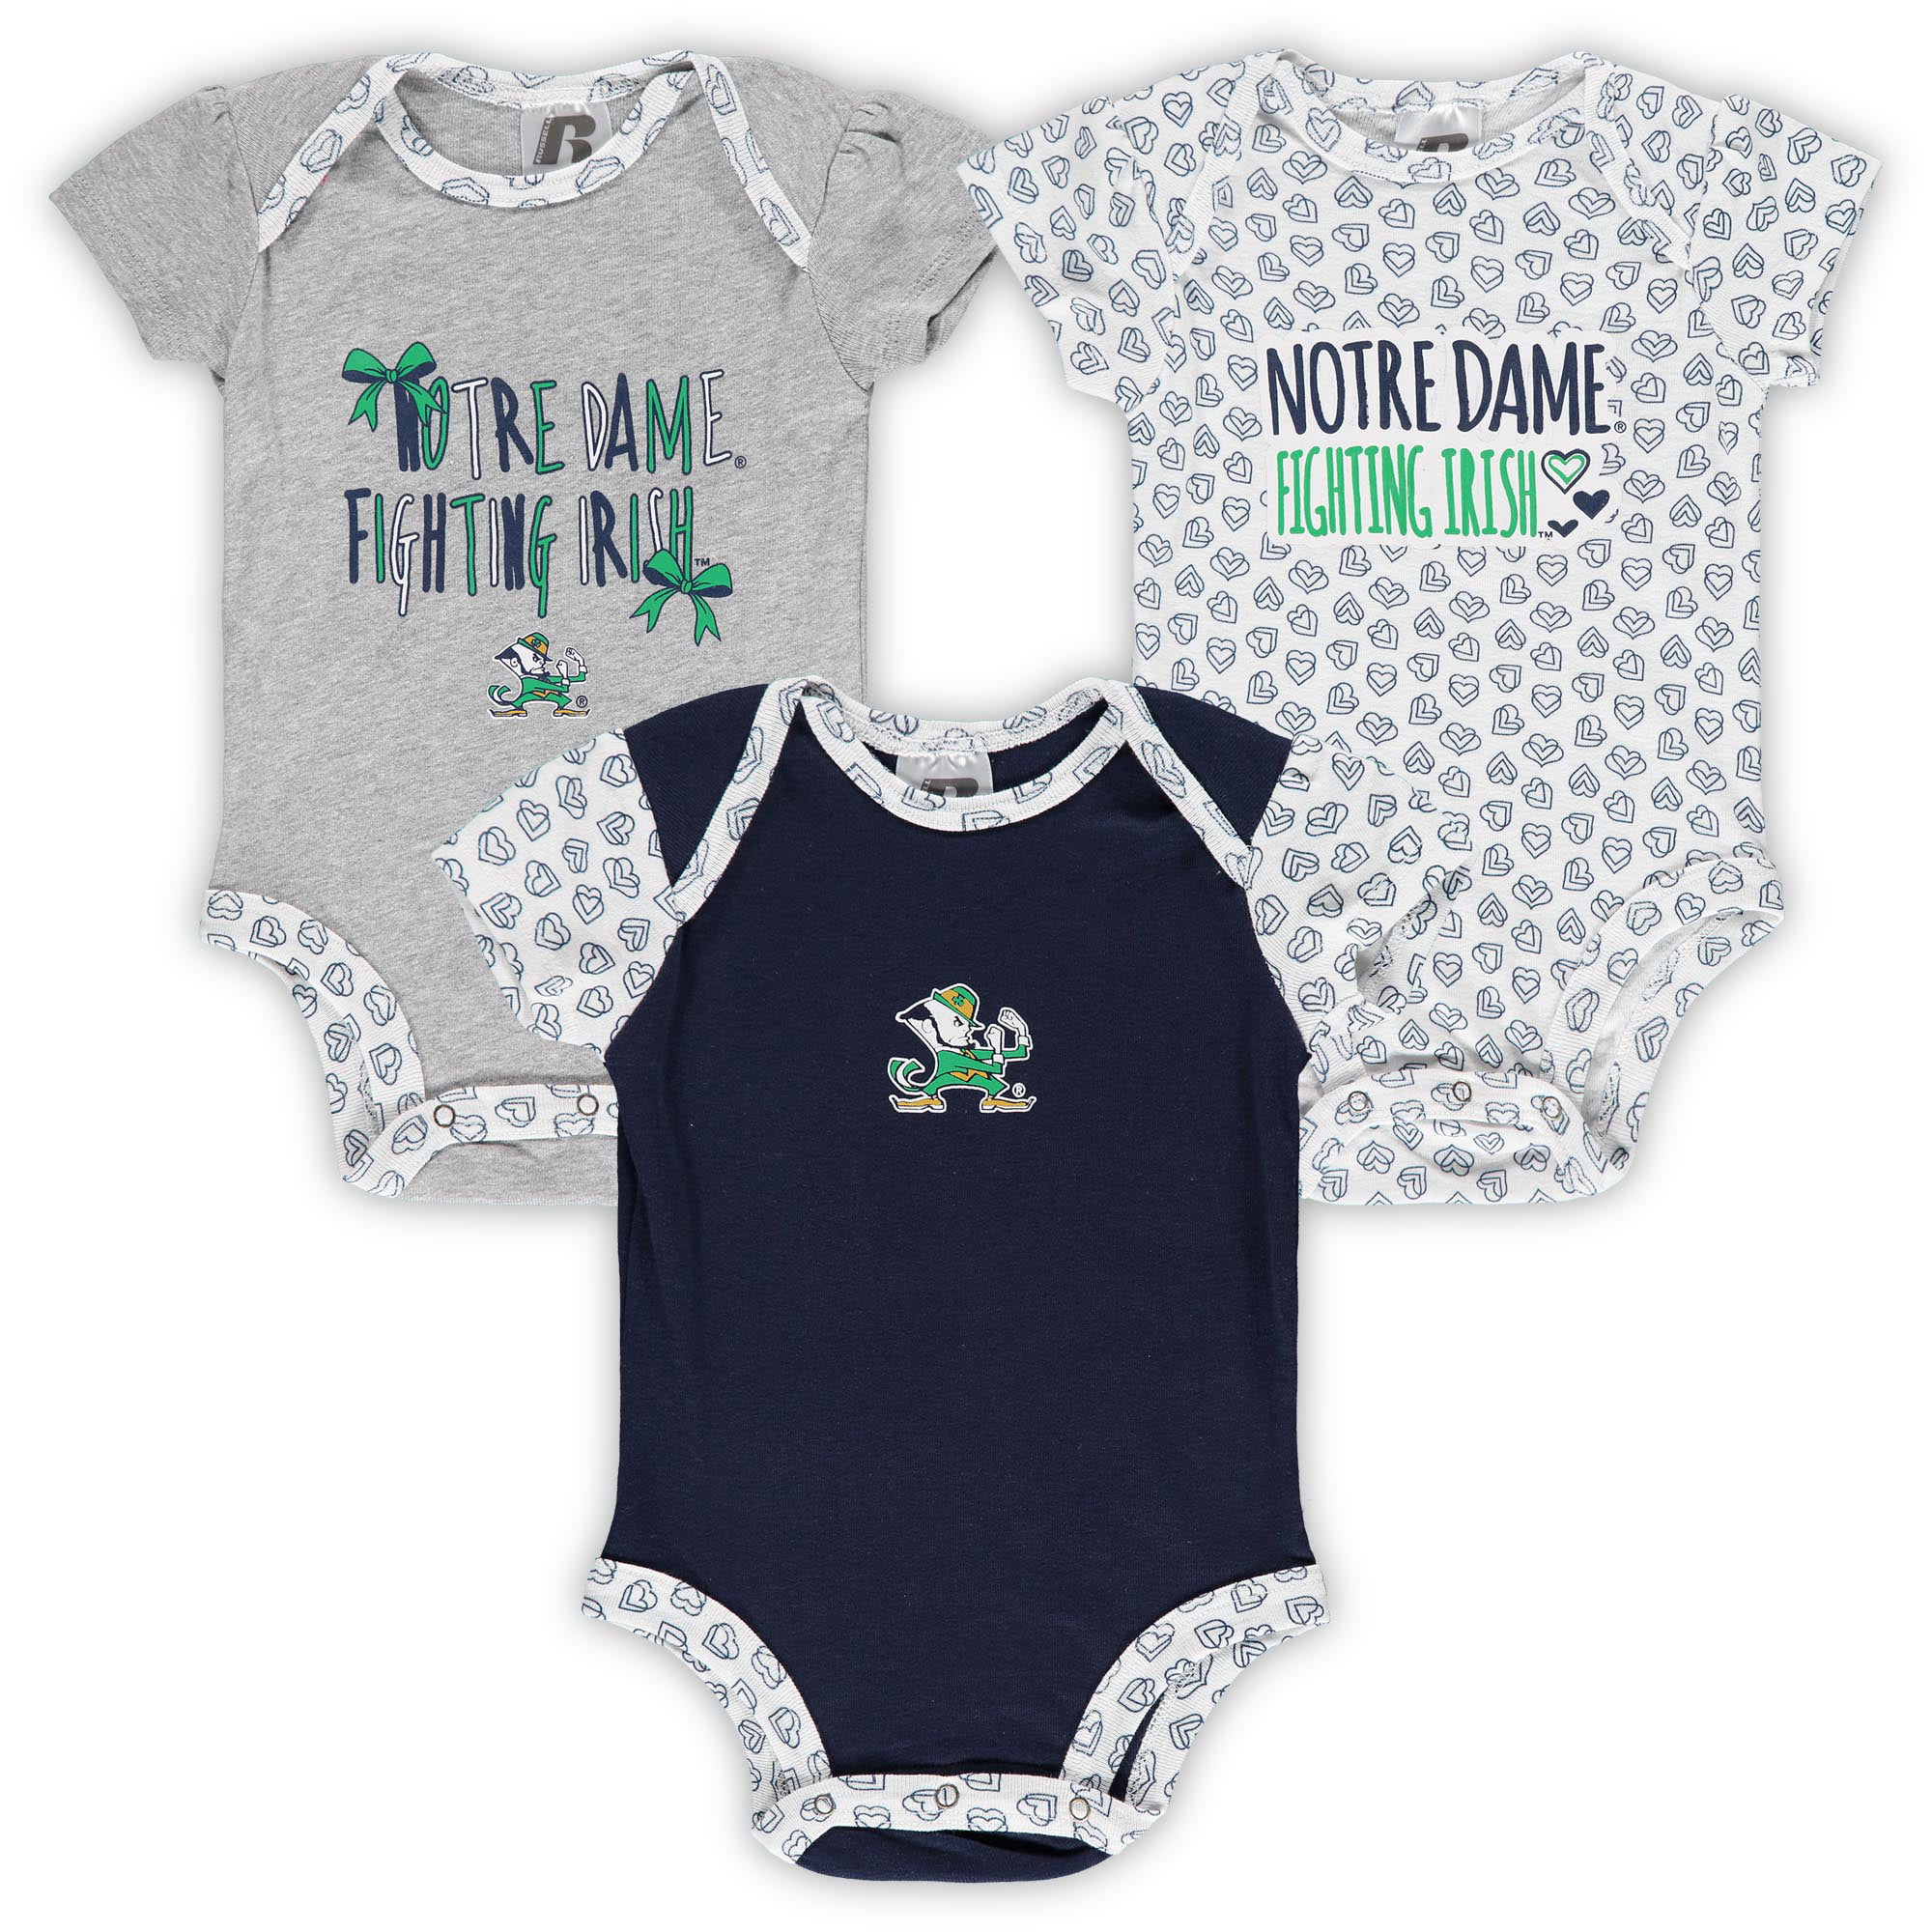 Infant Girl and Boy Oregon /'Made./' Cotton One Piece Bodysuit